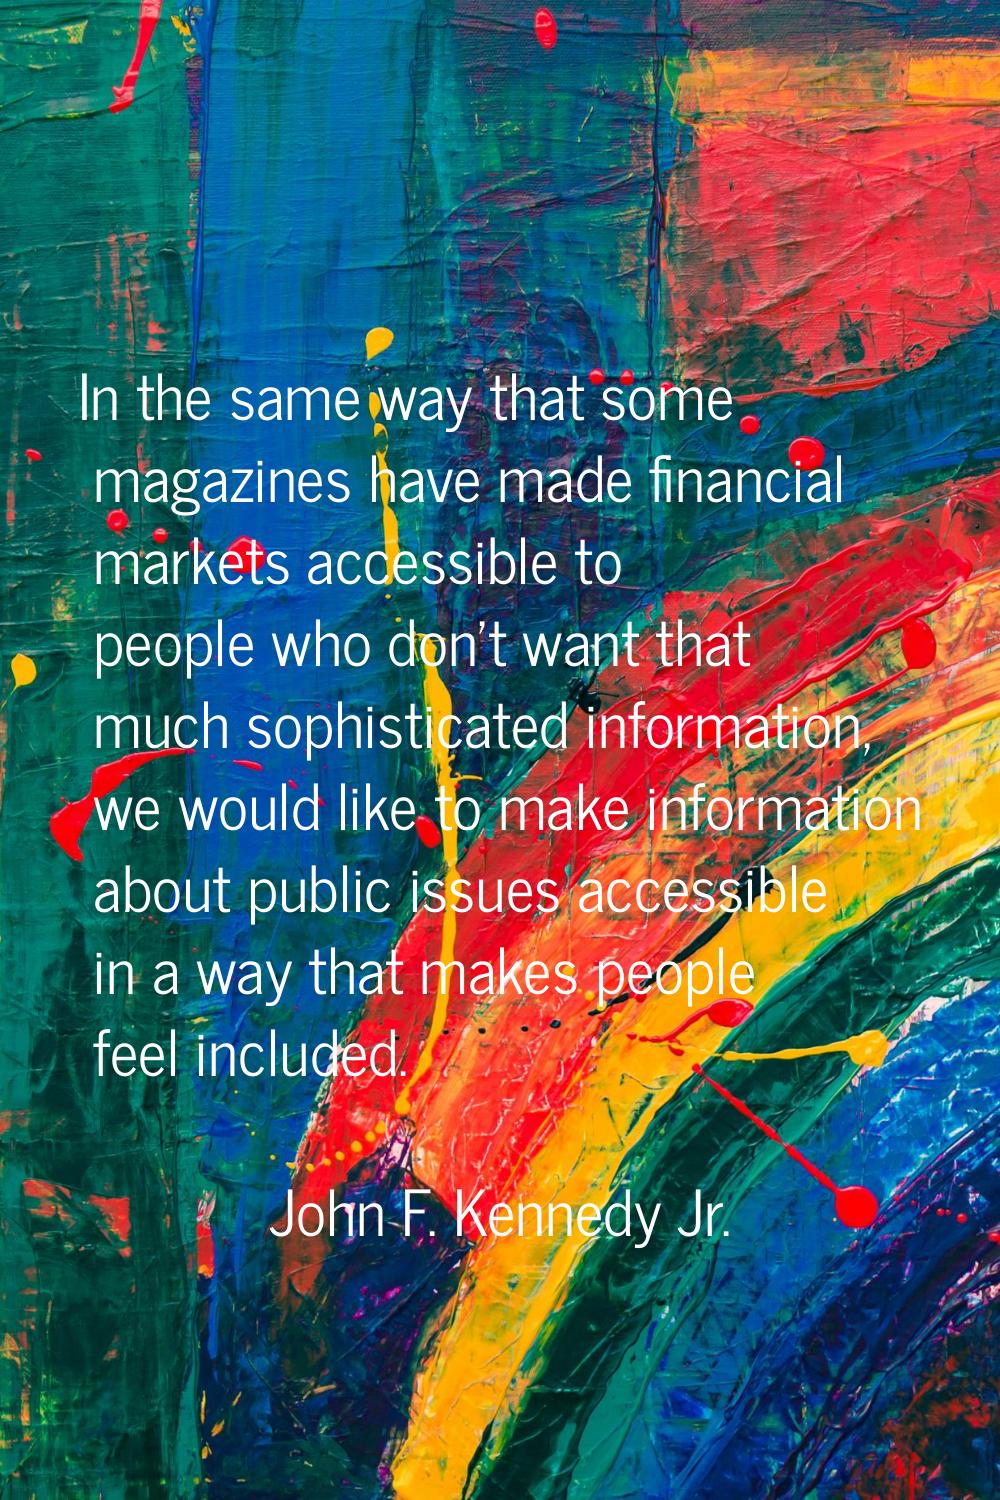 In the same way that some magazines have made financial markets accessible to people who don't want